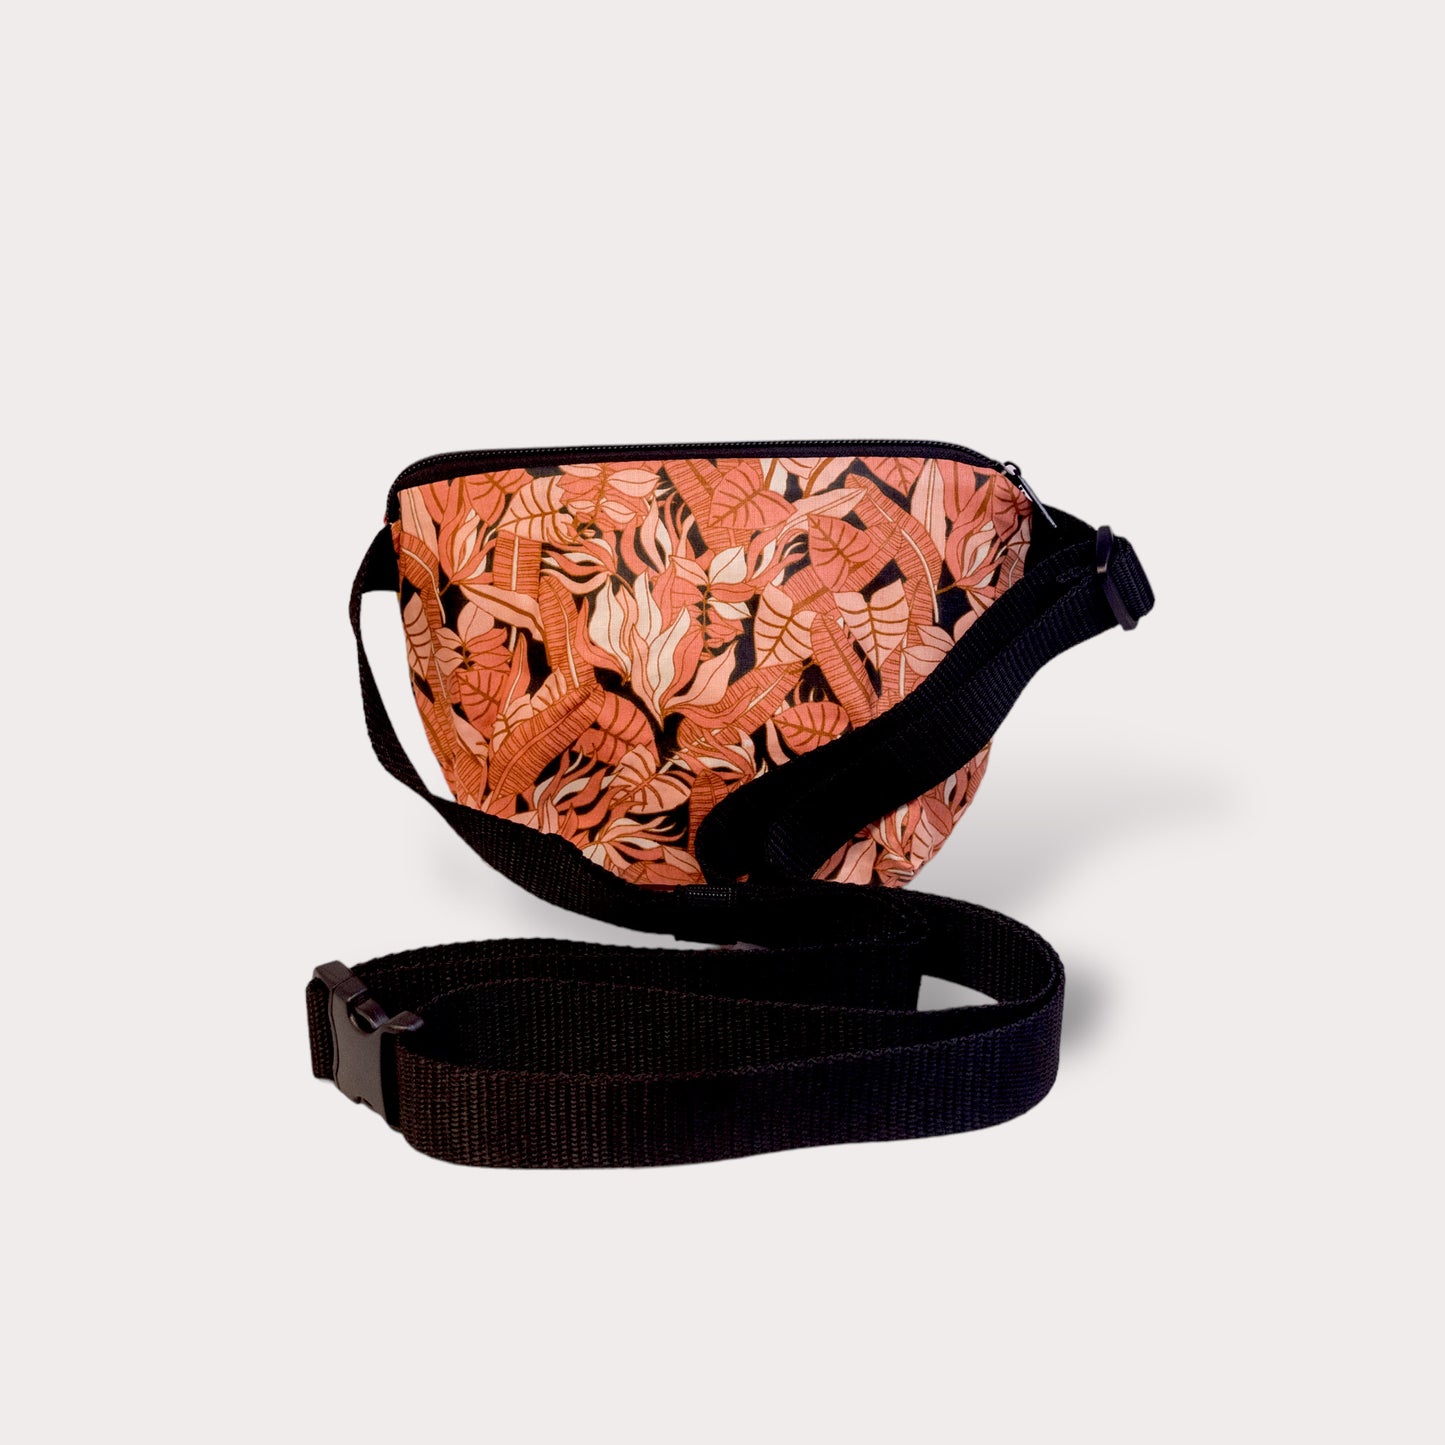 Small Hip Bag .  All the Women. Fabric